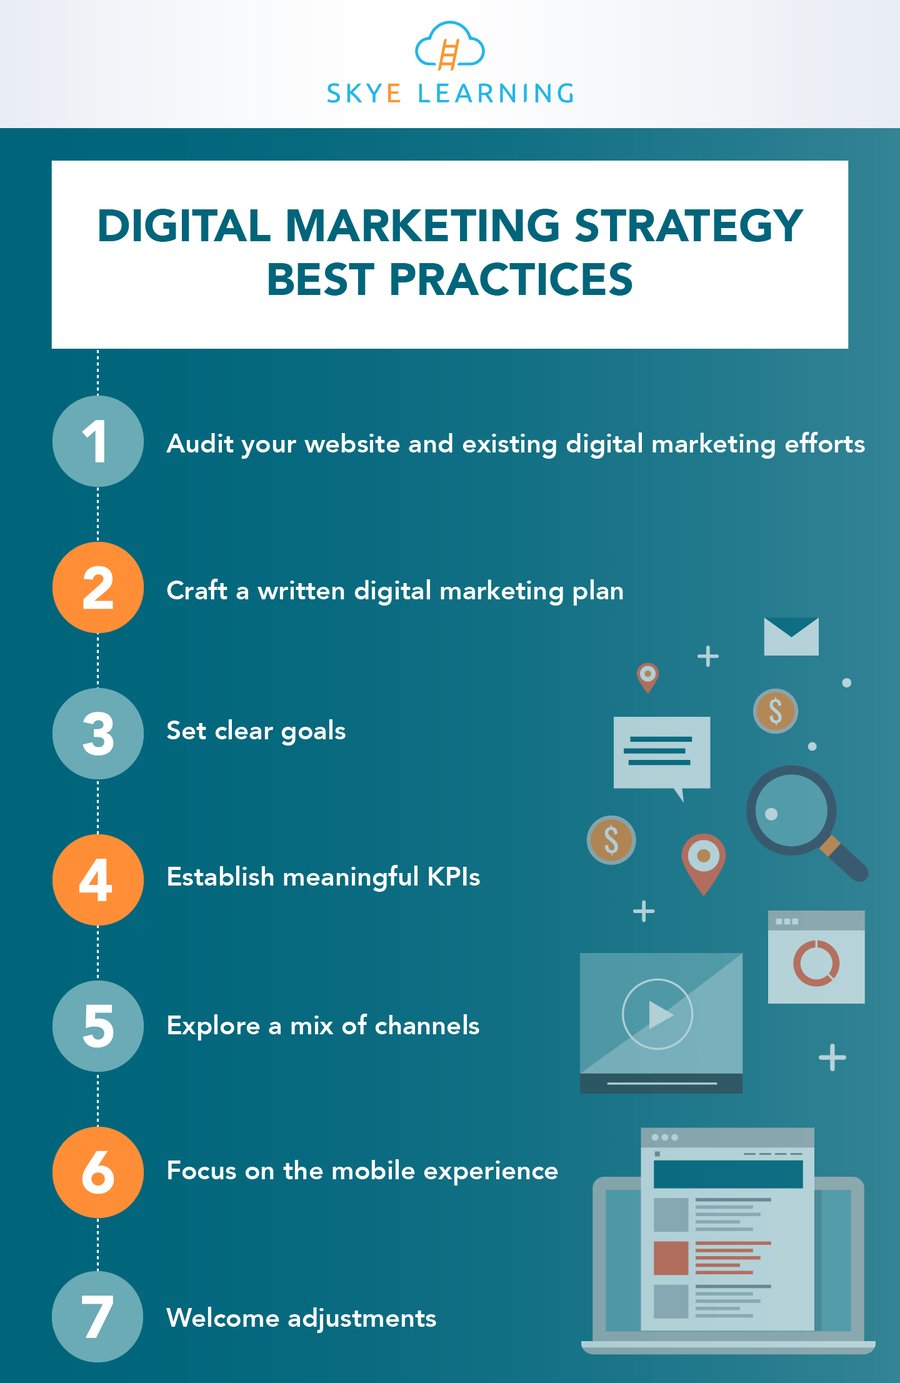 7 Tips for an Effective Marketing Strategy